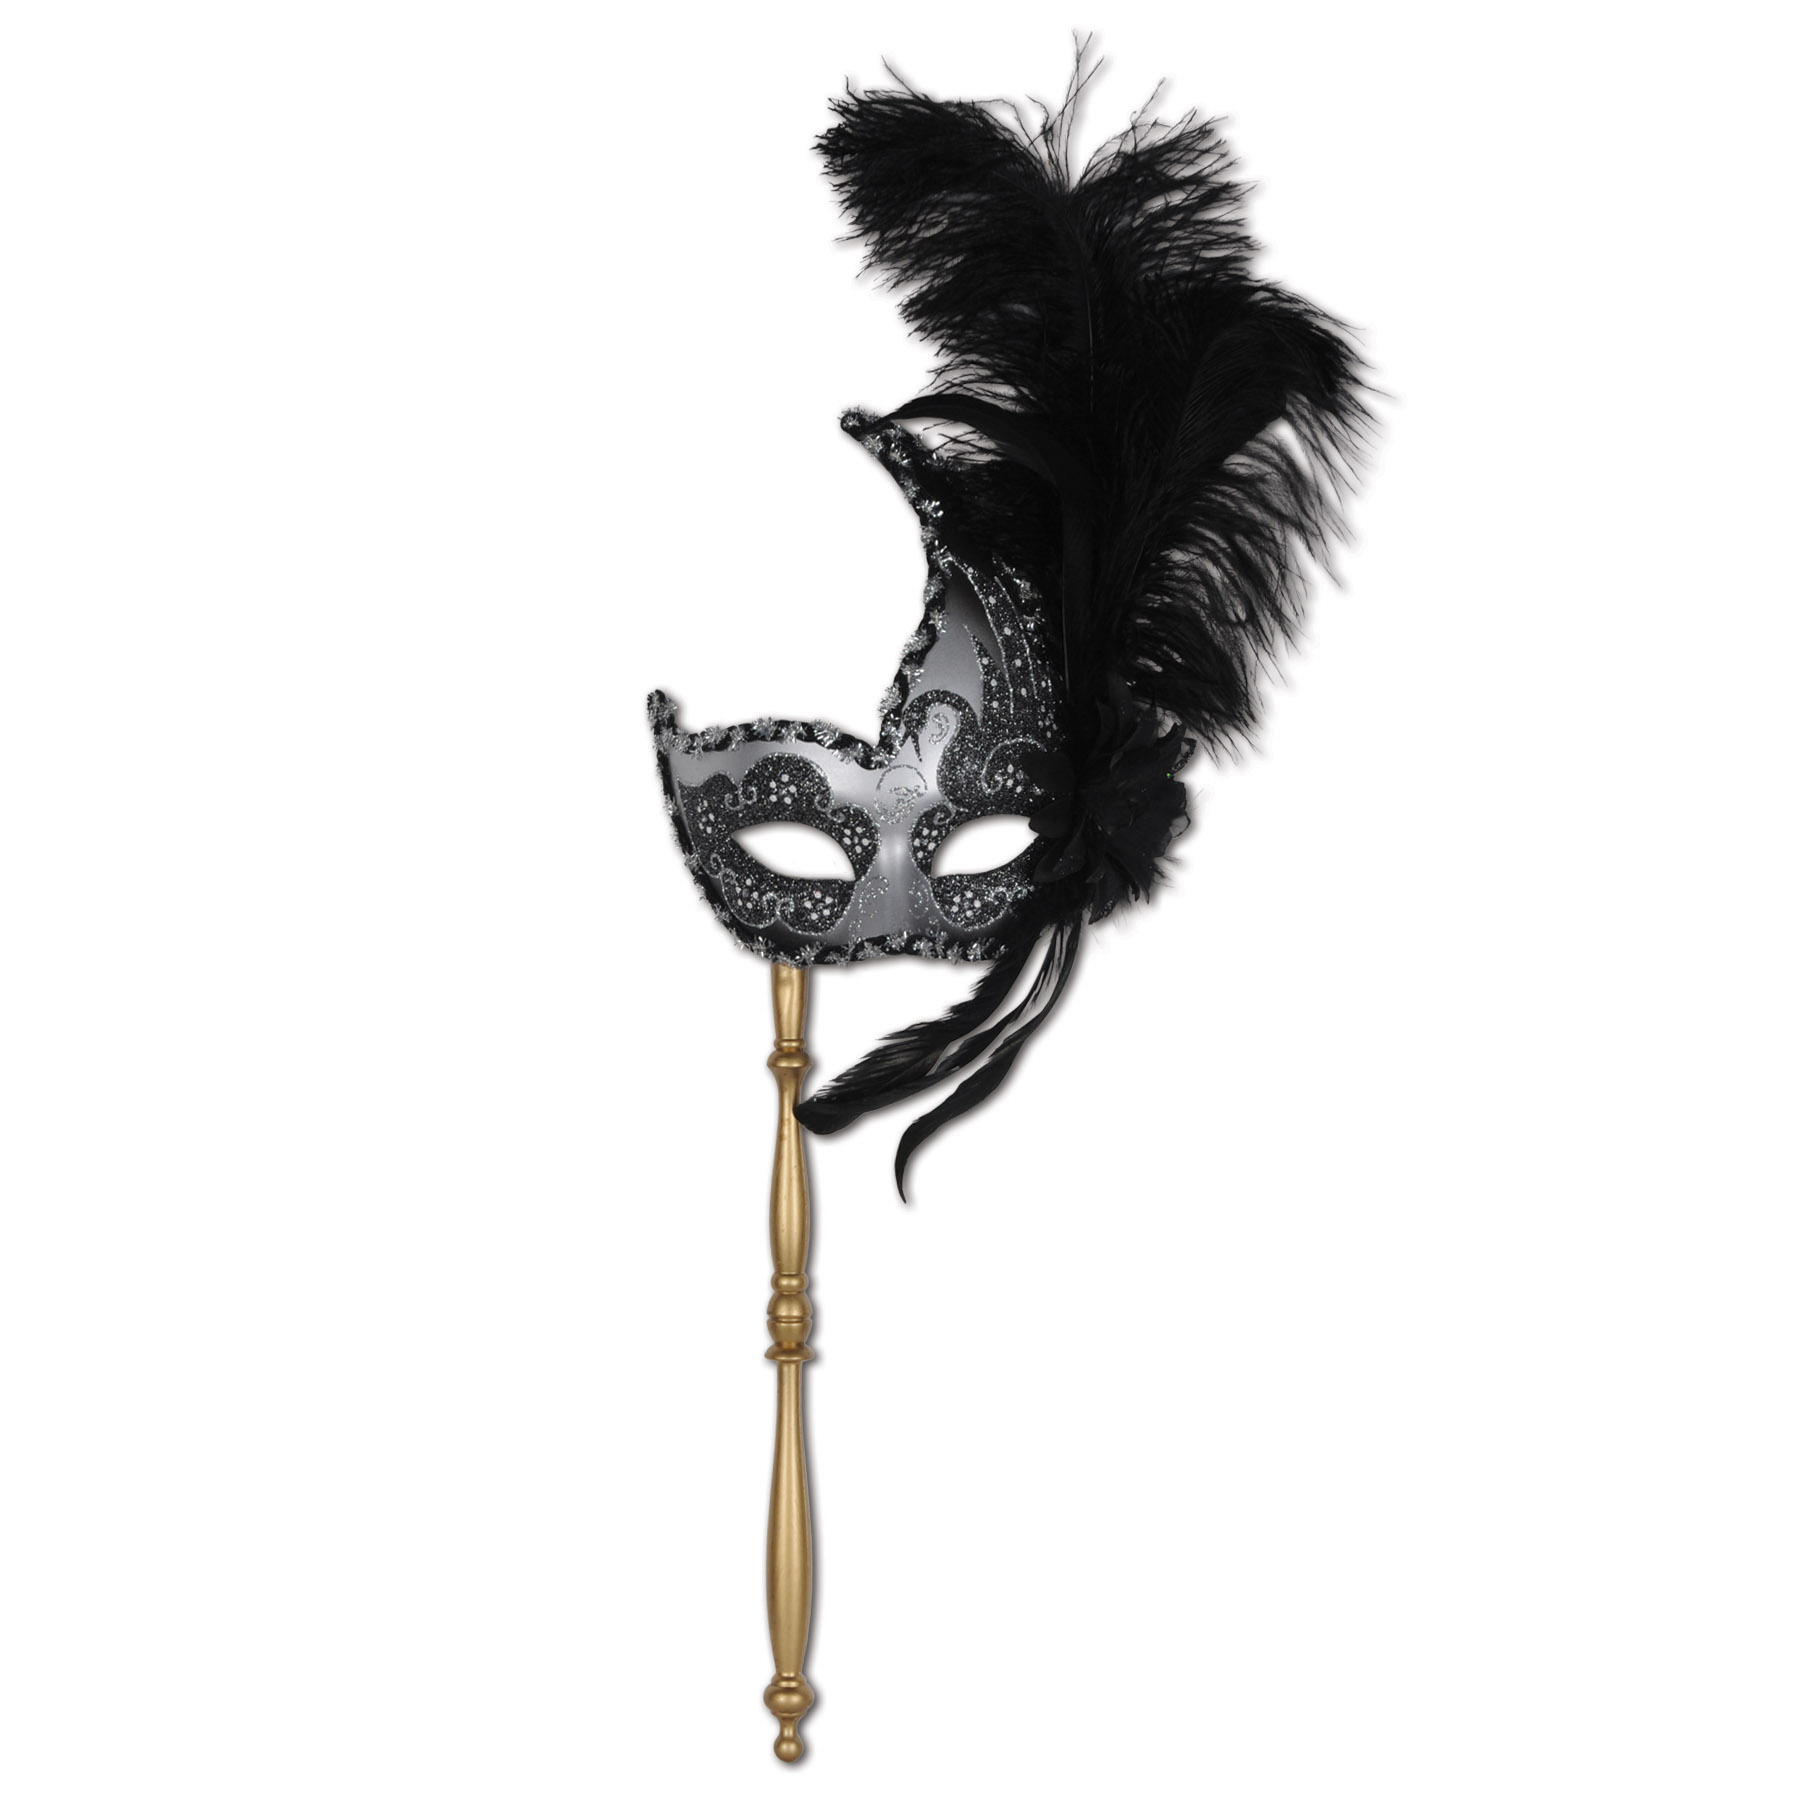 Feathered black and silver mardi gras mask supported by a golden stick. 